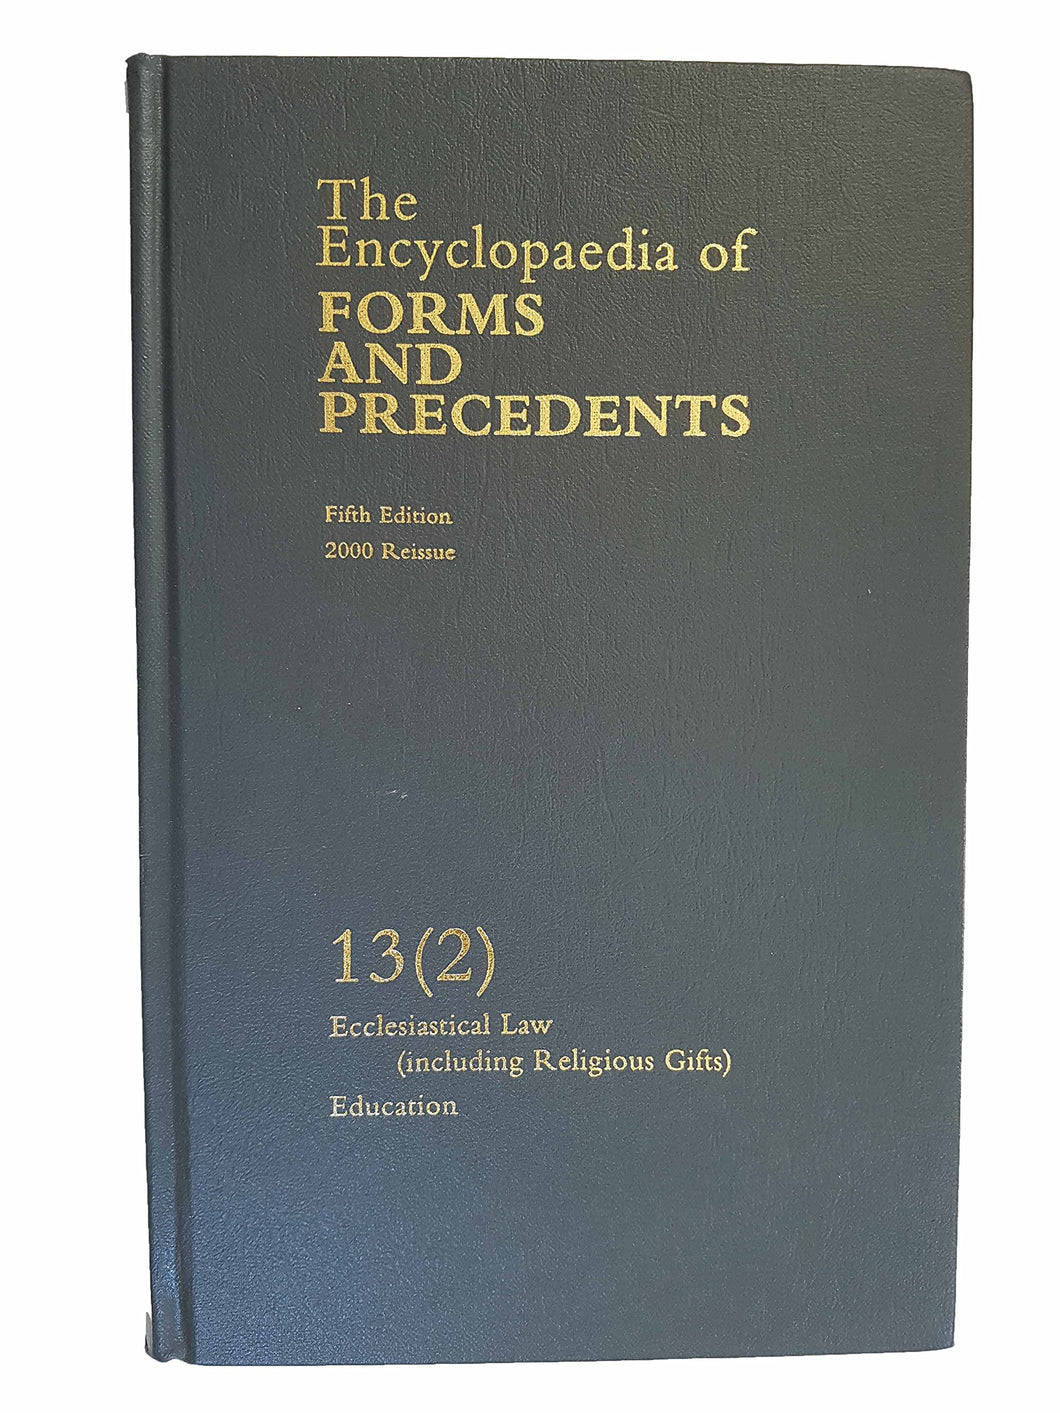 The Encyclopedia of Forms and Precedents, Fifth Edition, 2000 Reissue: Volume 13 (2): Ecclesiastical Law (including Religious Gifts), Education